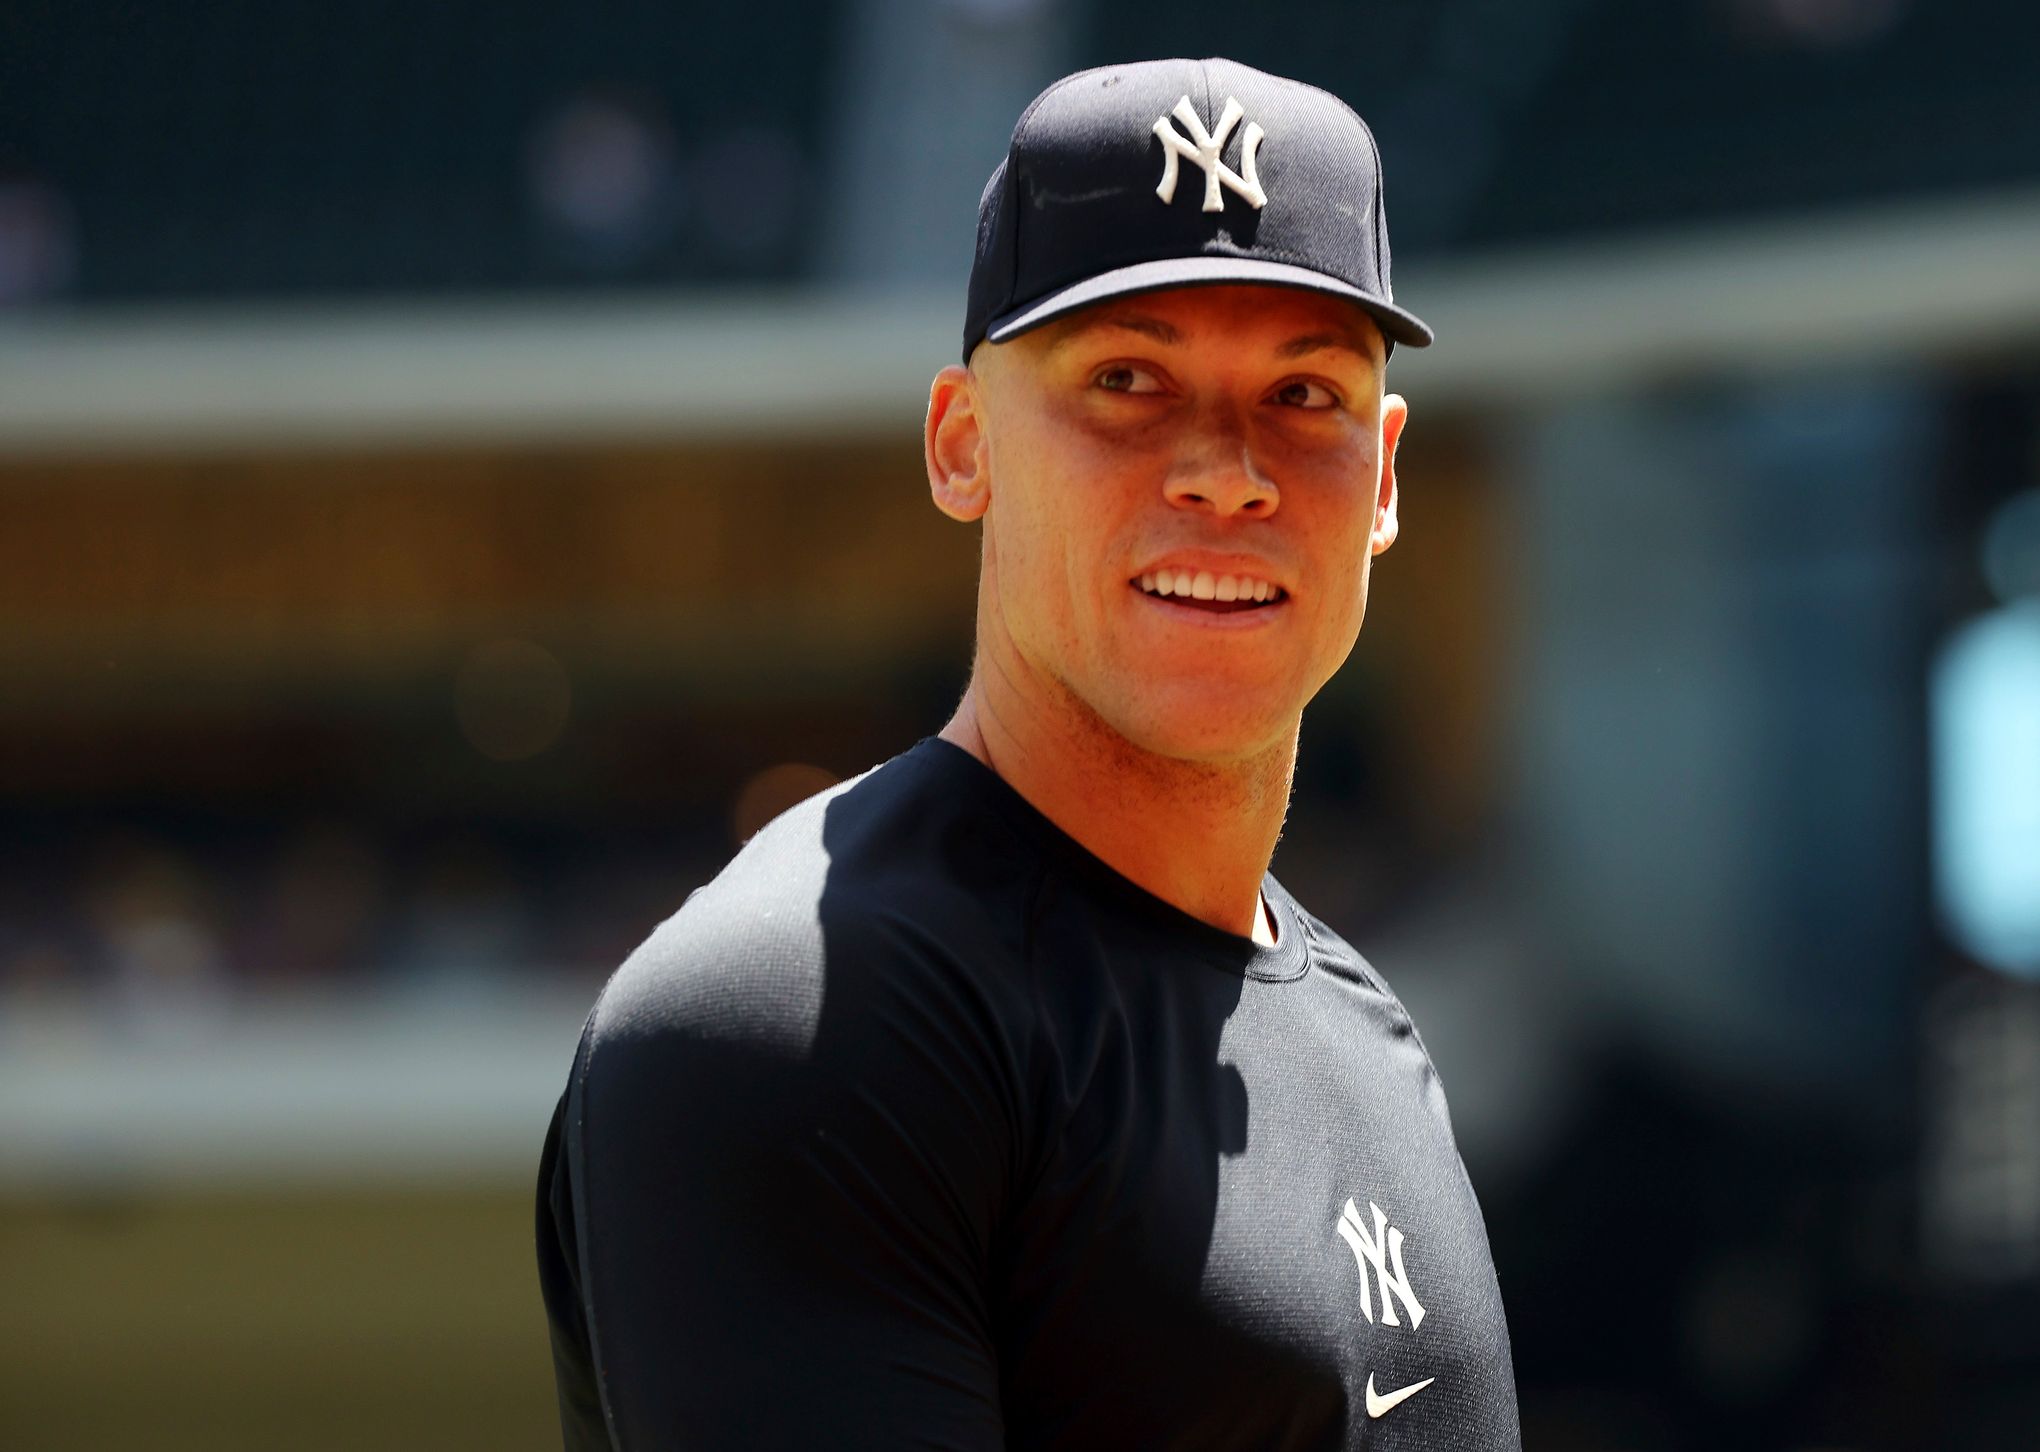 Aaron Judge could be next NY Yankees captain. Here's why